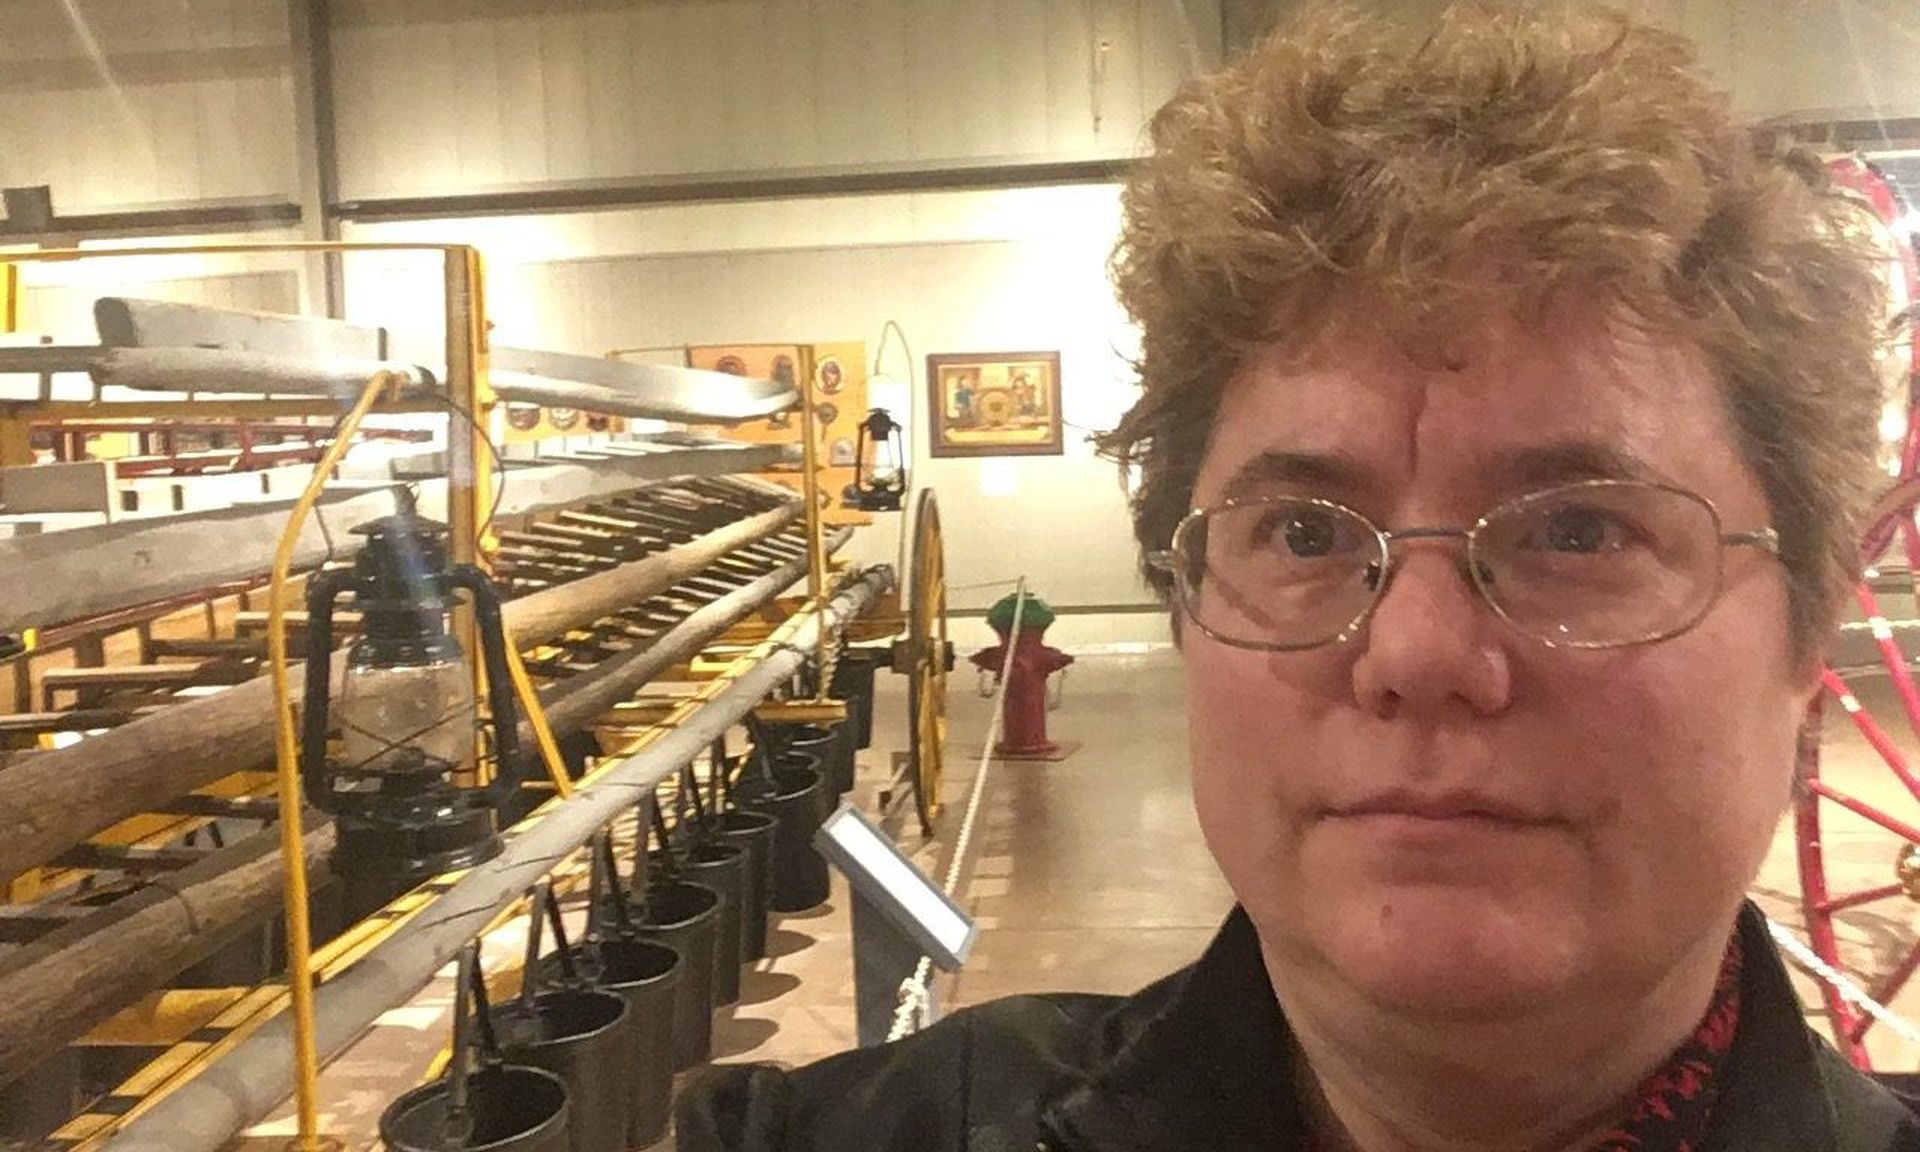 April Murdoch of Seattle Public Schools poses at a local museum. She notes that K-12 is a bit behind the times when it comes to cybersecurity, but making progress.